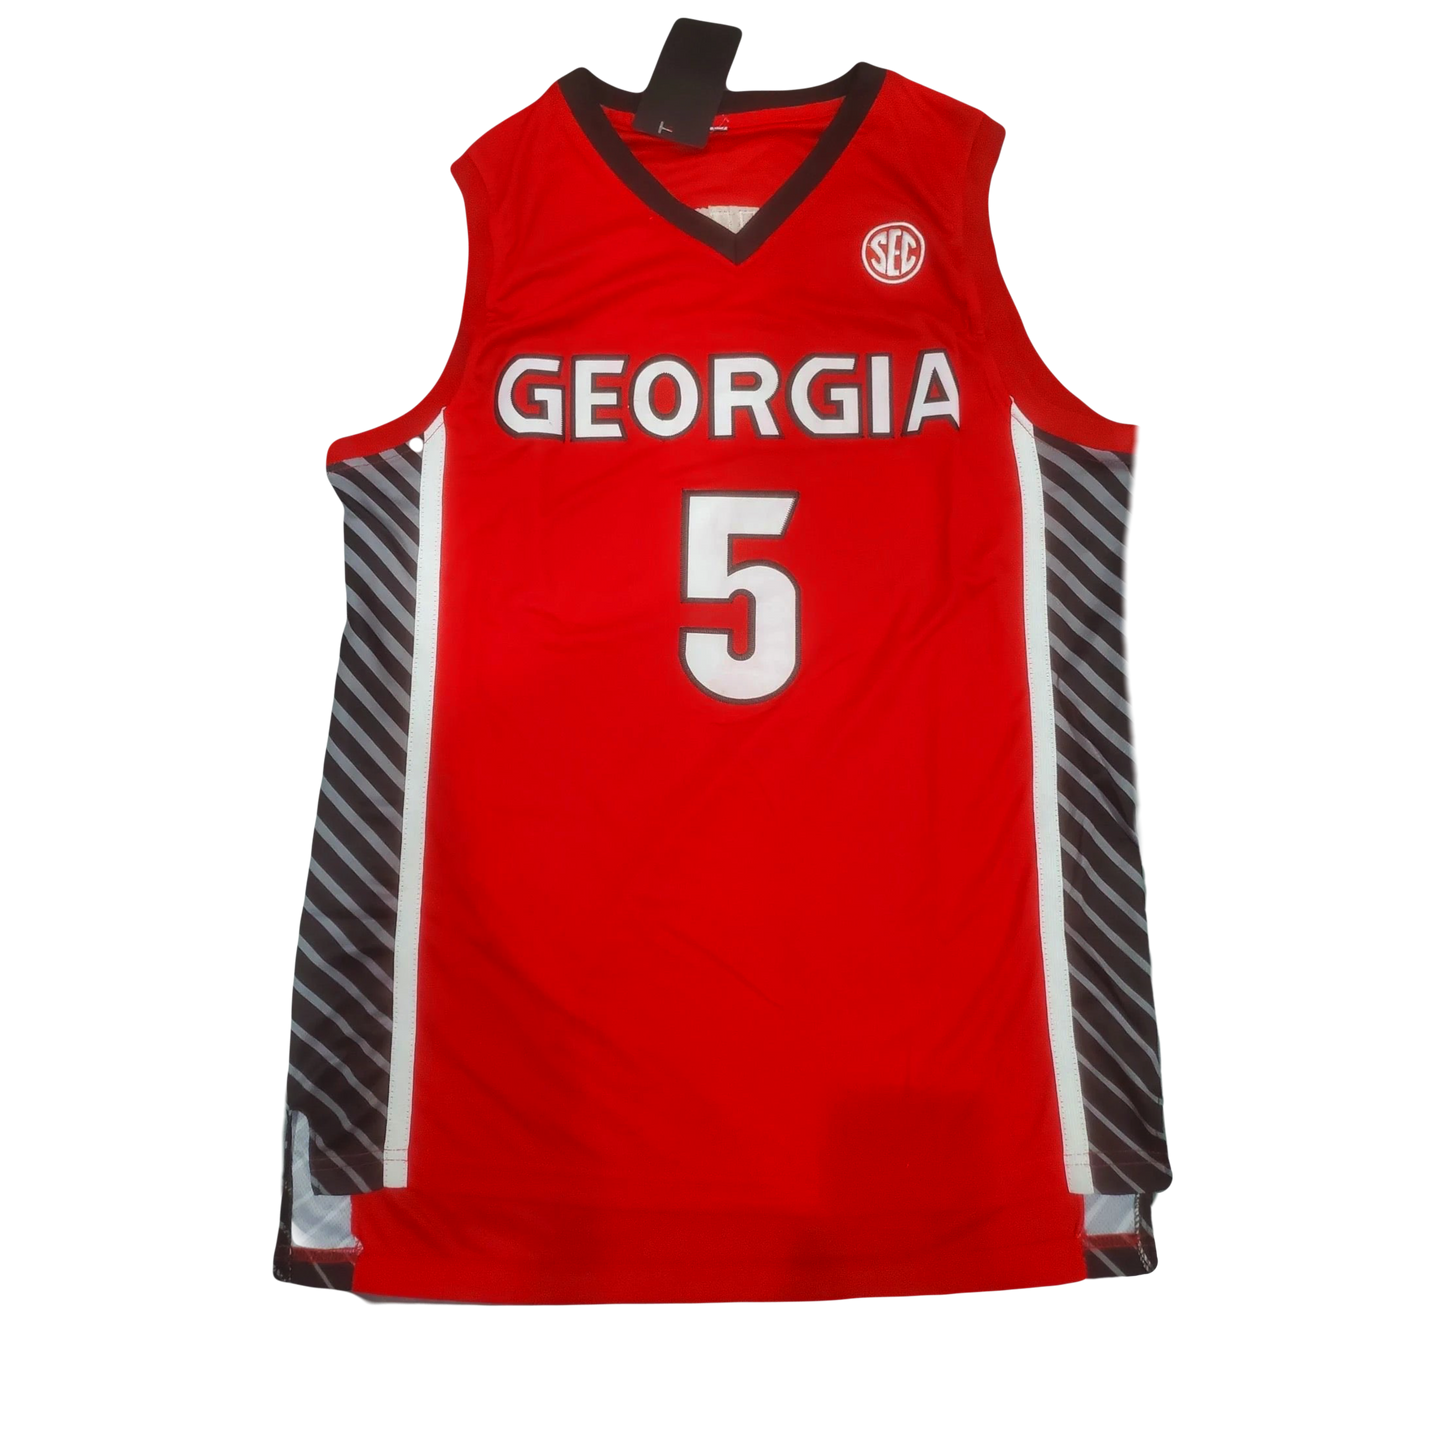 Anthony Edwards Georgia Bulldogs NCAA 2020 Campus Legend College Basketball Jersey - Red